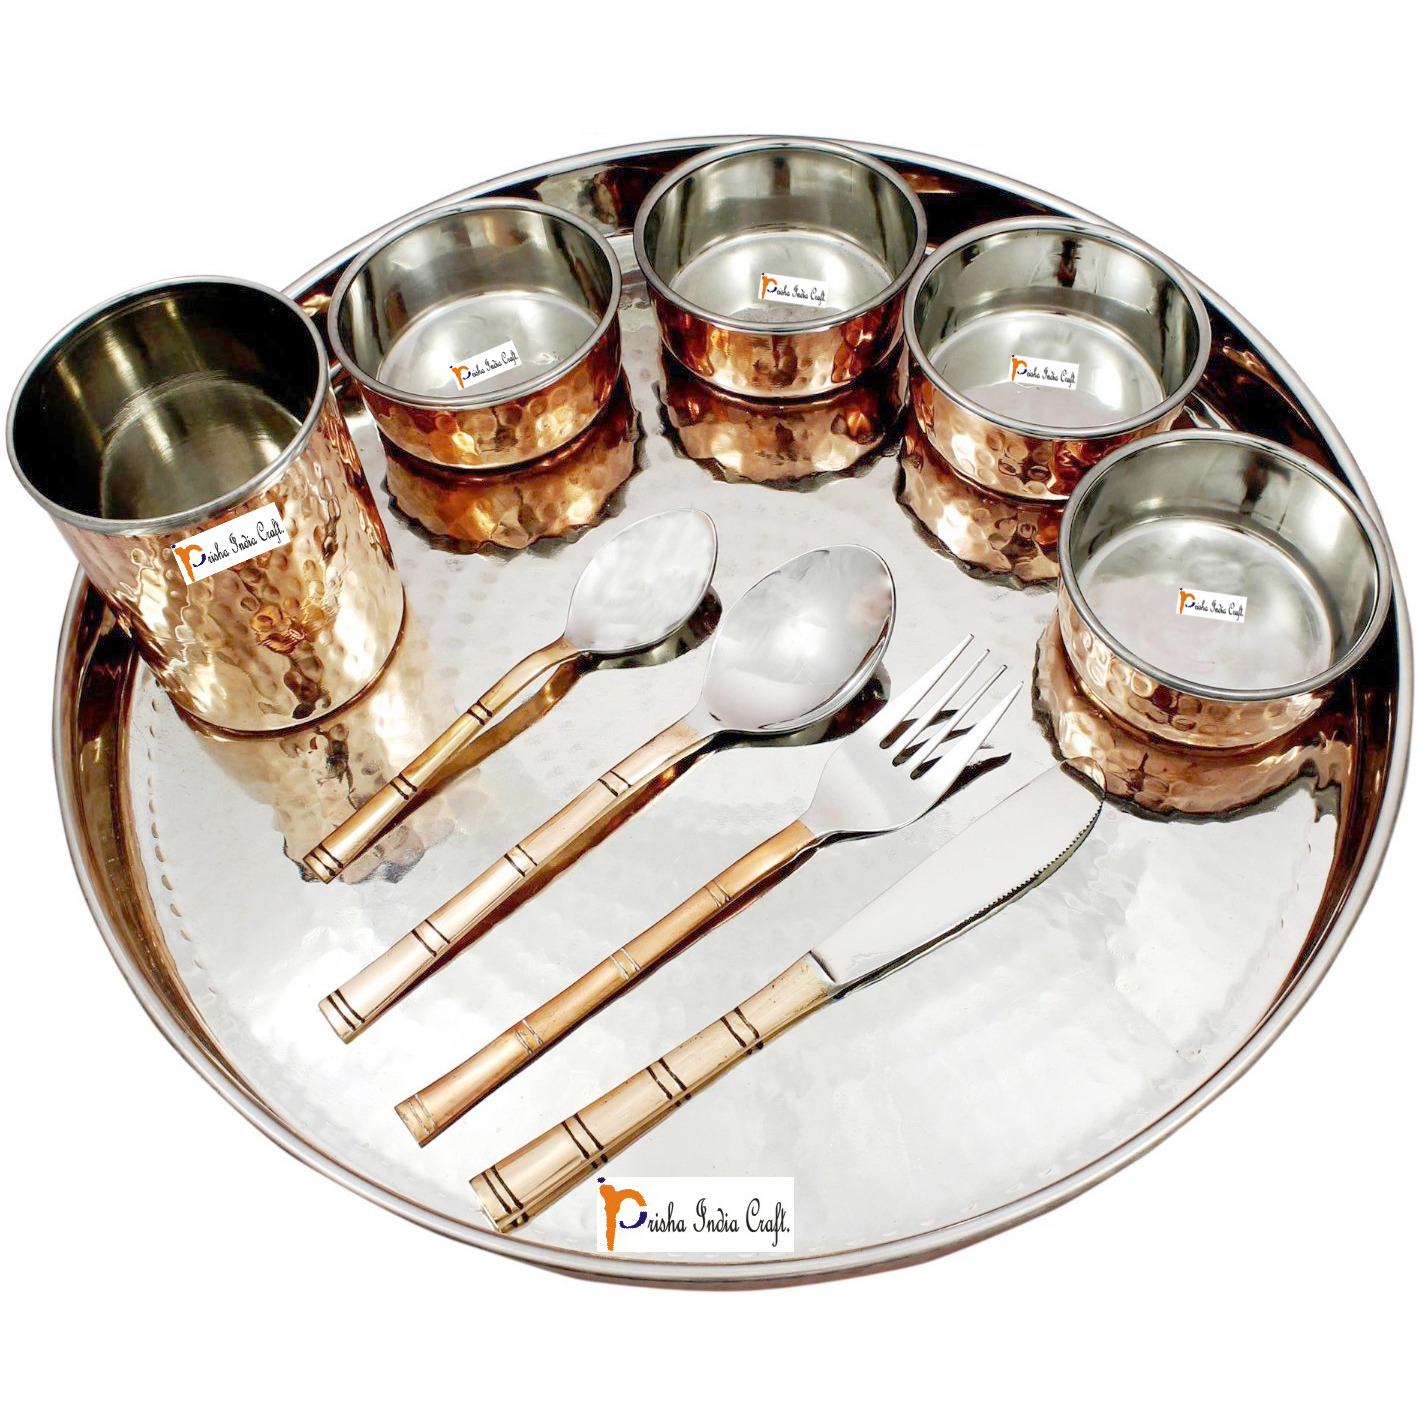 Prisha India Craft B. Set of 2 Dinnerware Traditional Stainless Steel Copper Dinner Set of Thali Plate, Bowls, Glass and Spoons, Dia 13  With 1 Pure Copper Hammered Pitcher Jug - Christmas Gift